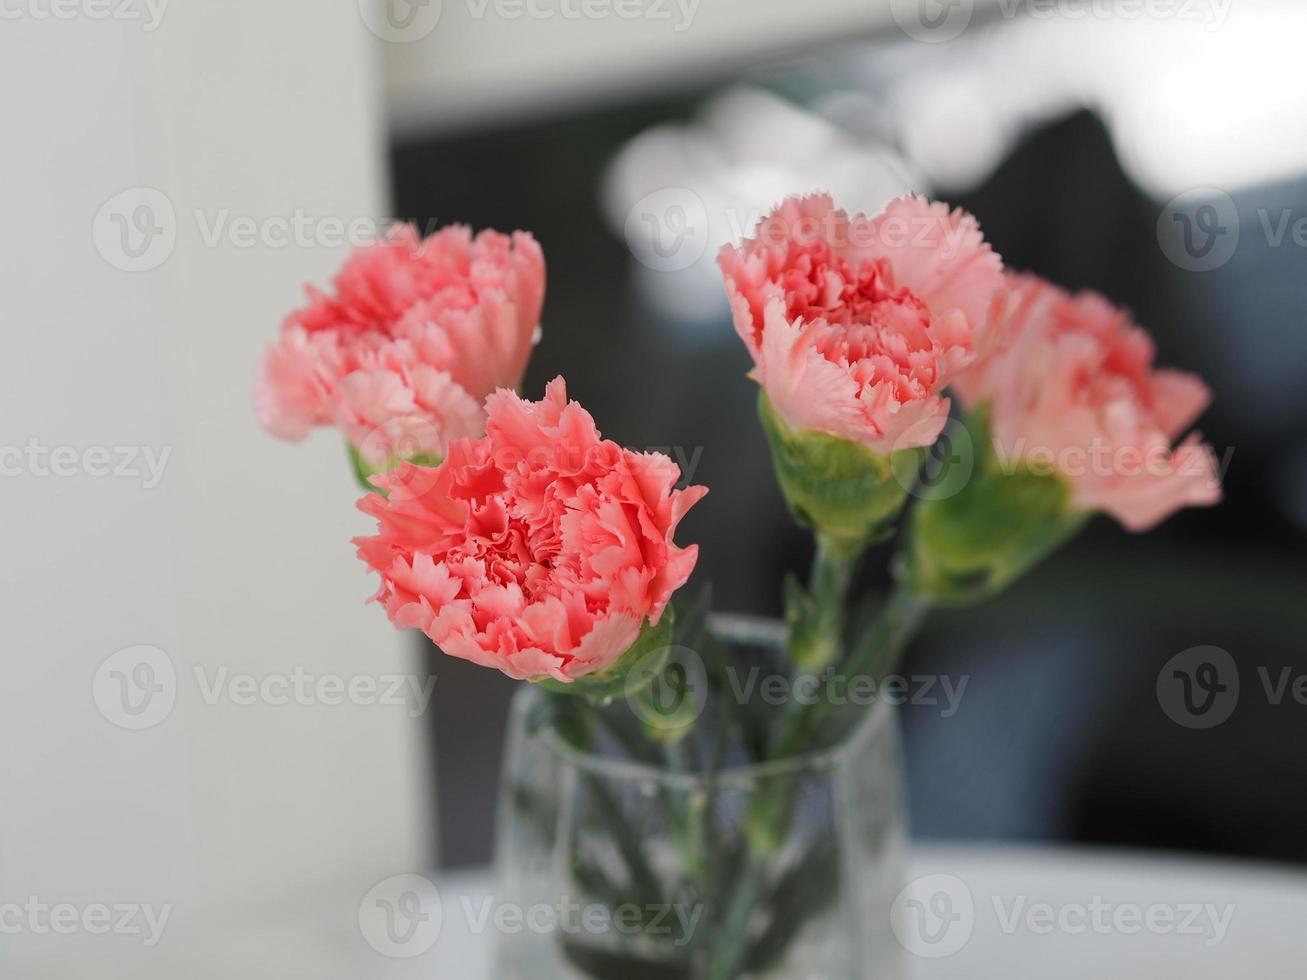 Pink Carnation flower in water glass on the table photo